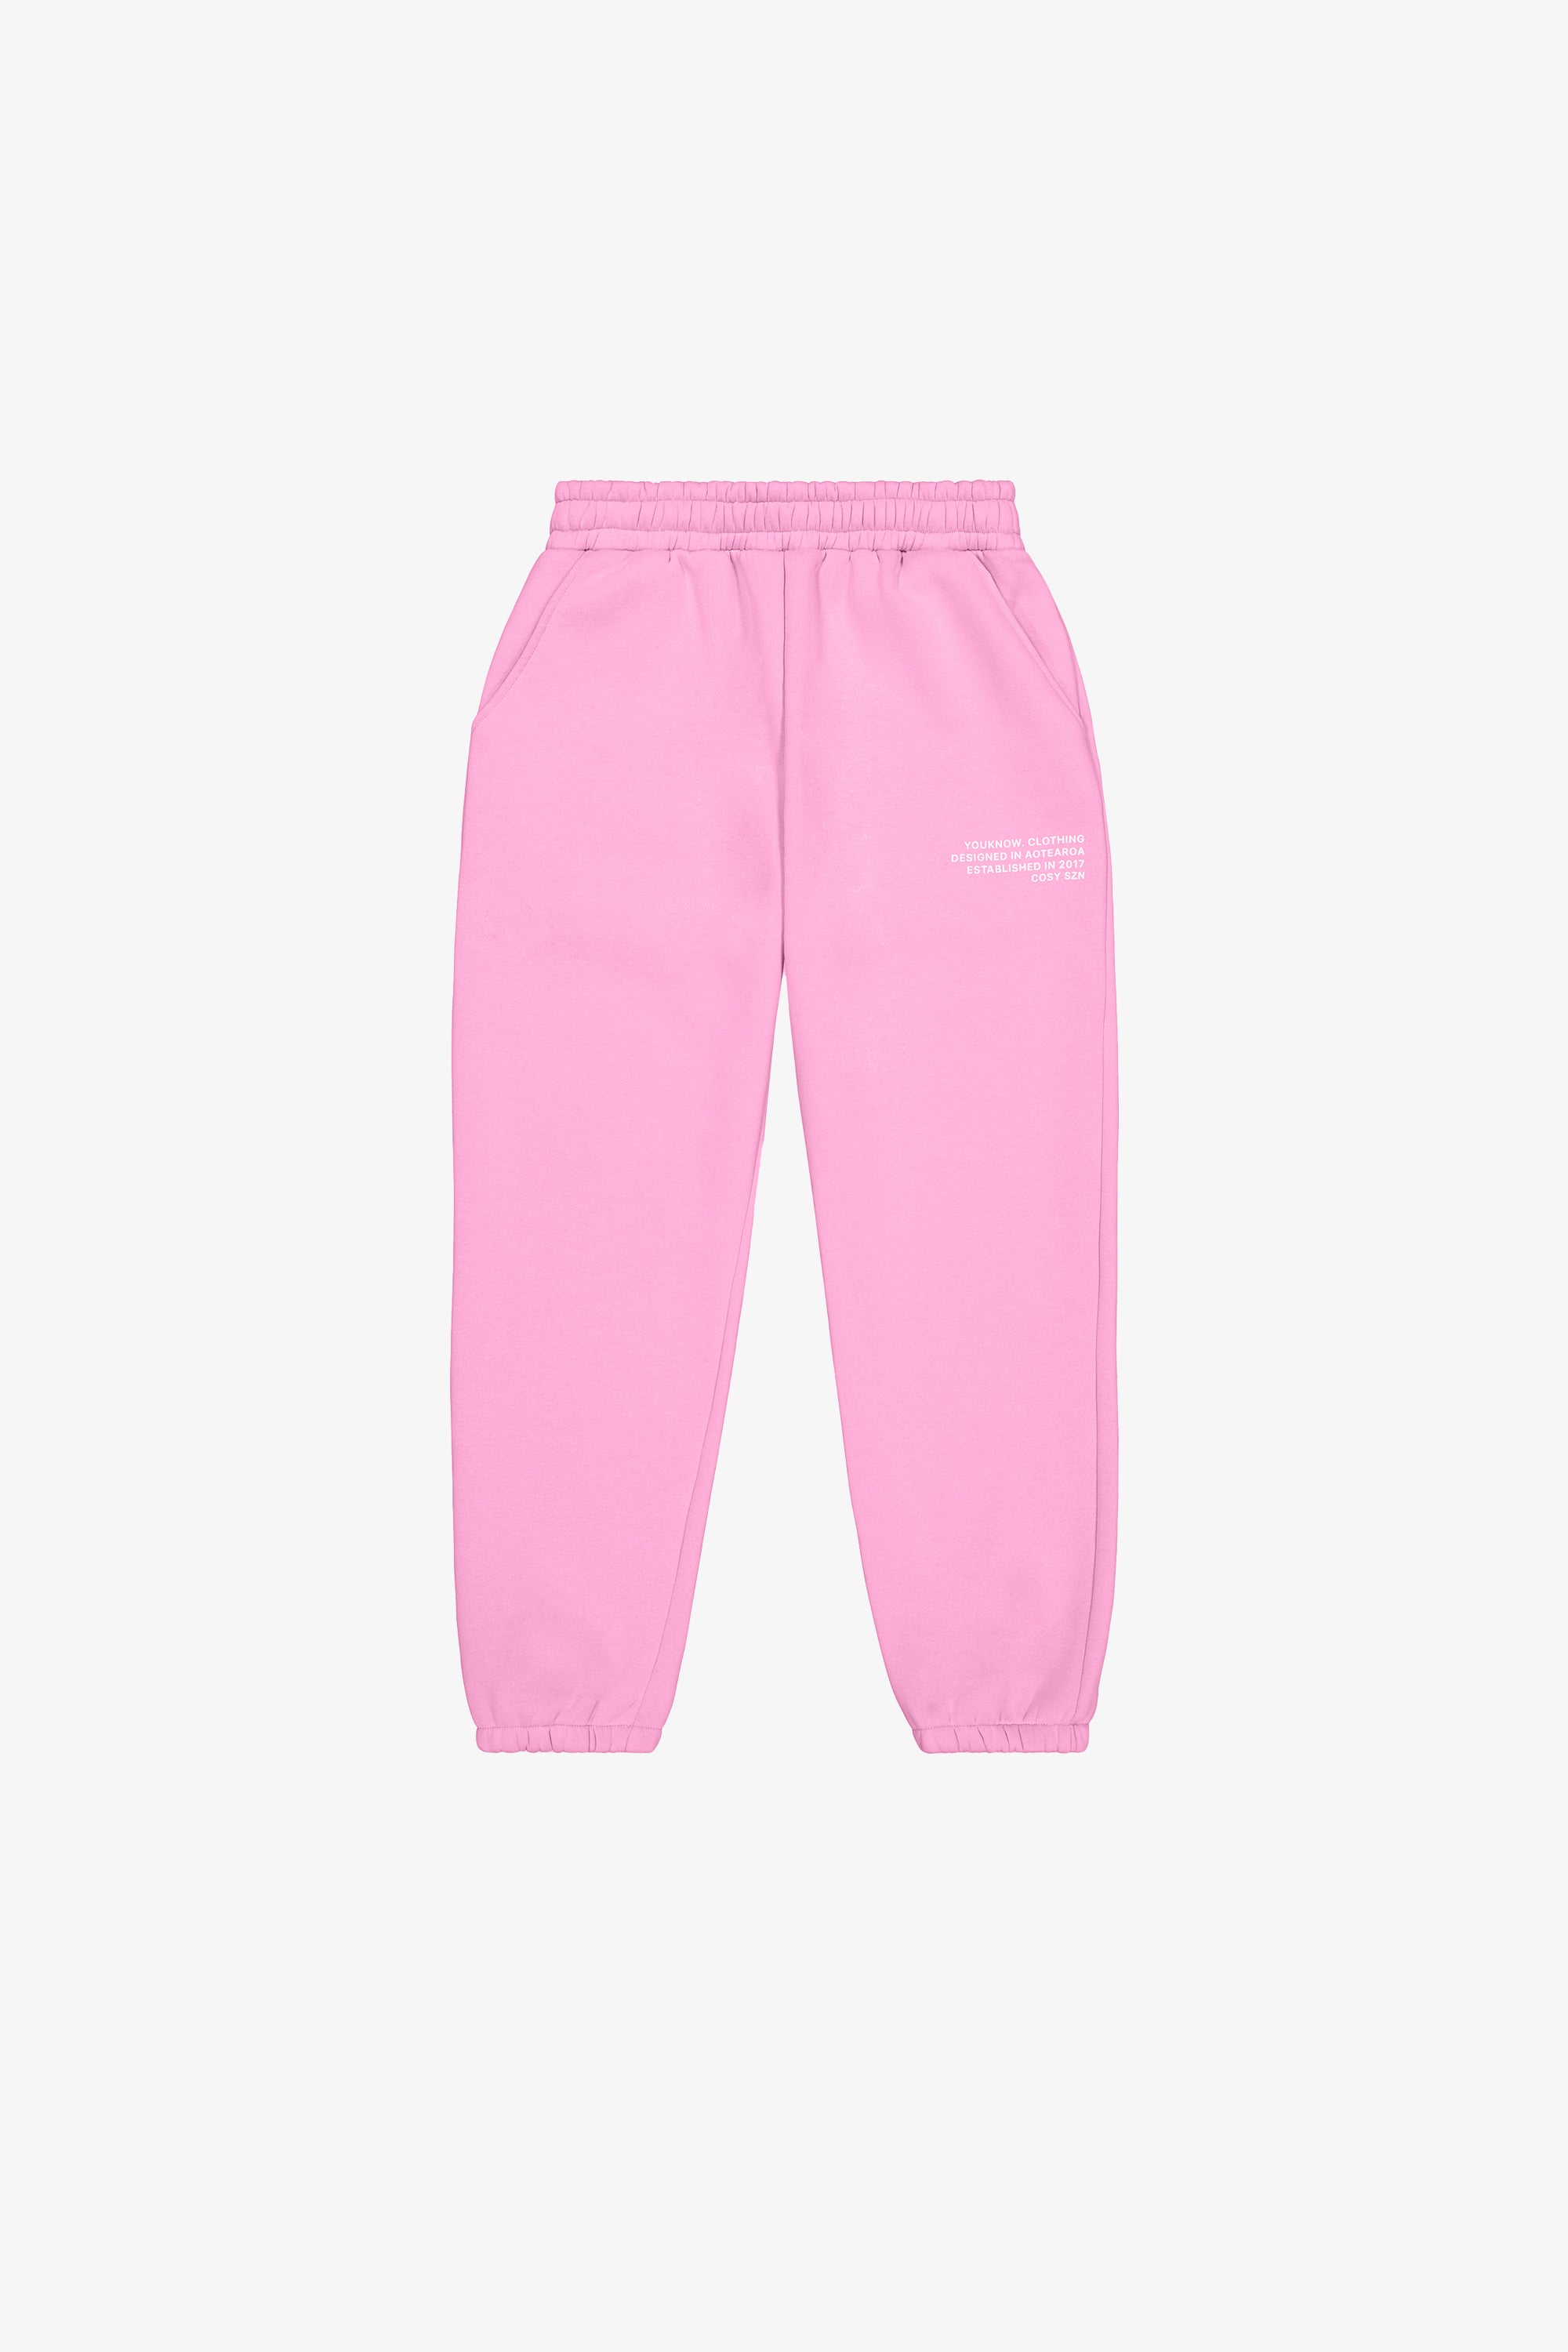 Fit finder image KIDS COSYSZN PANTS | BABY PINK